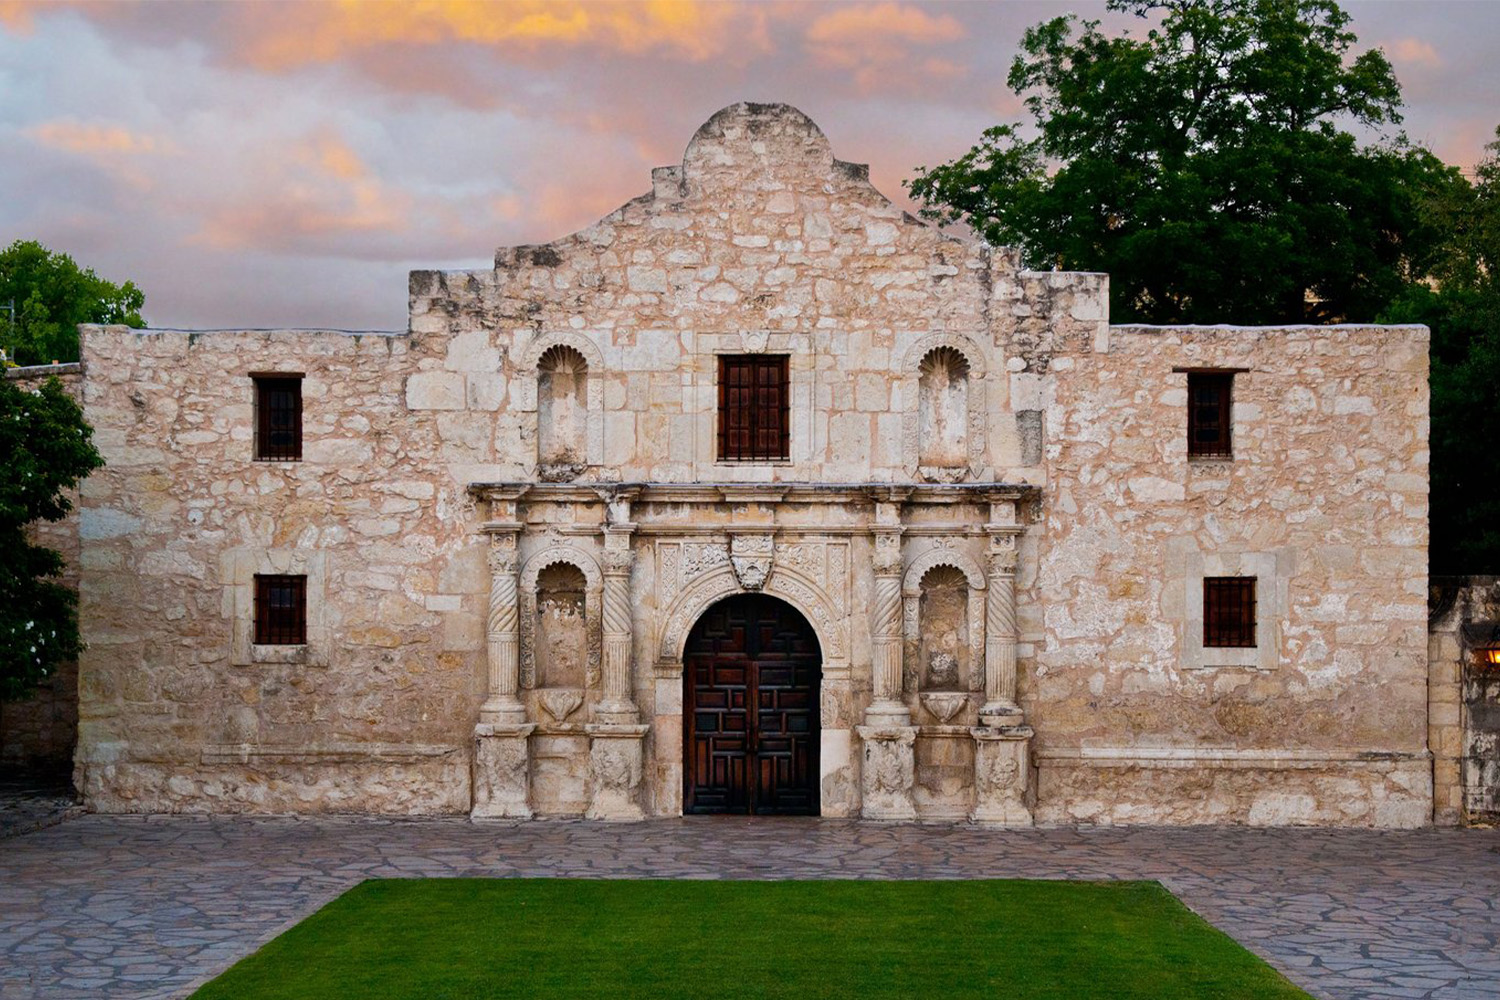 One of Texas's most haunted attractions: The Alamo